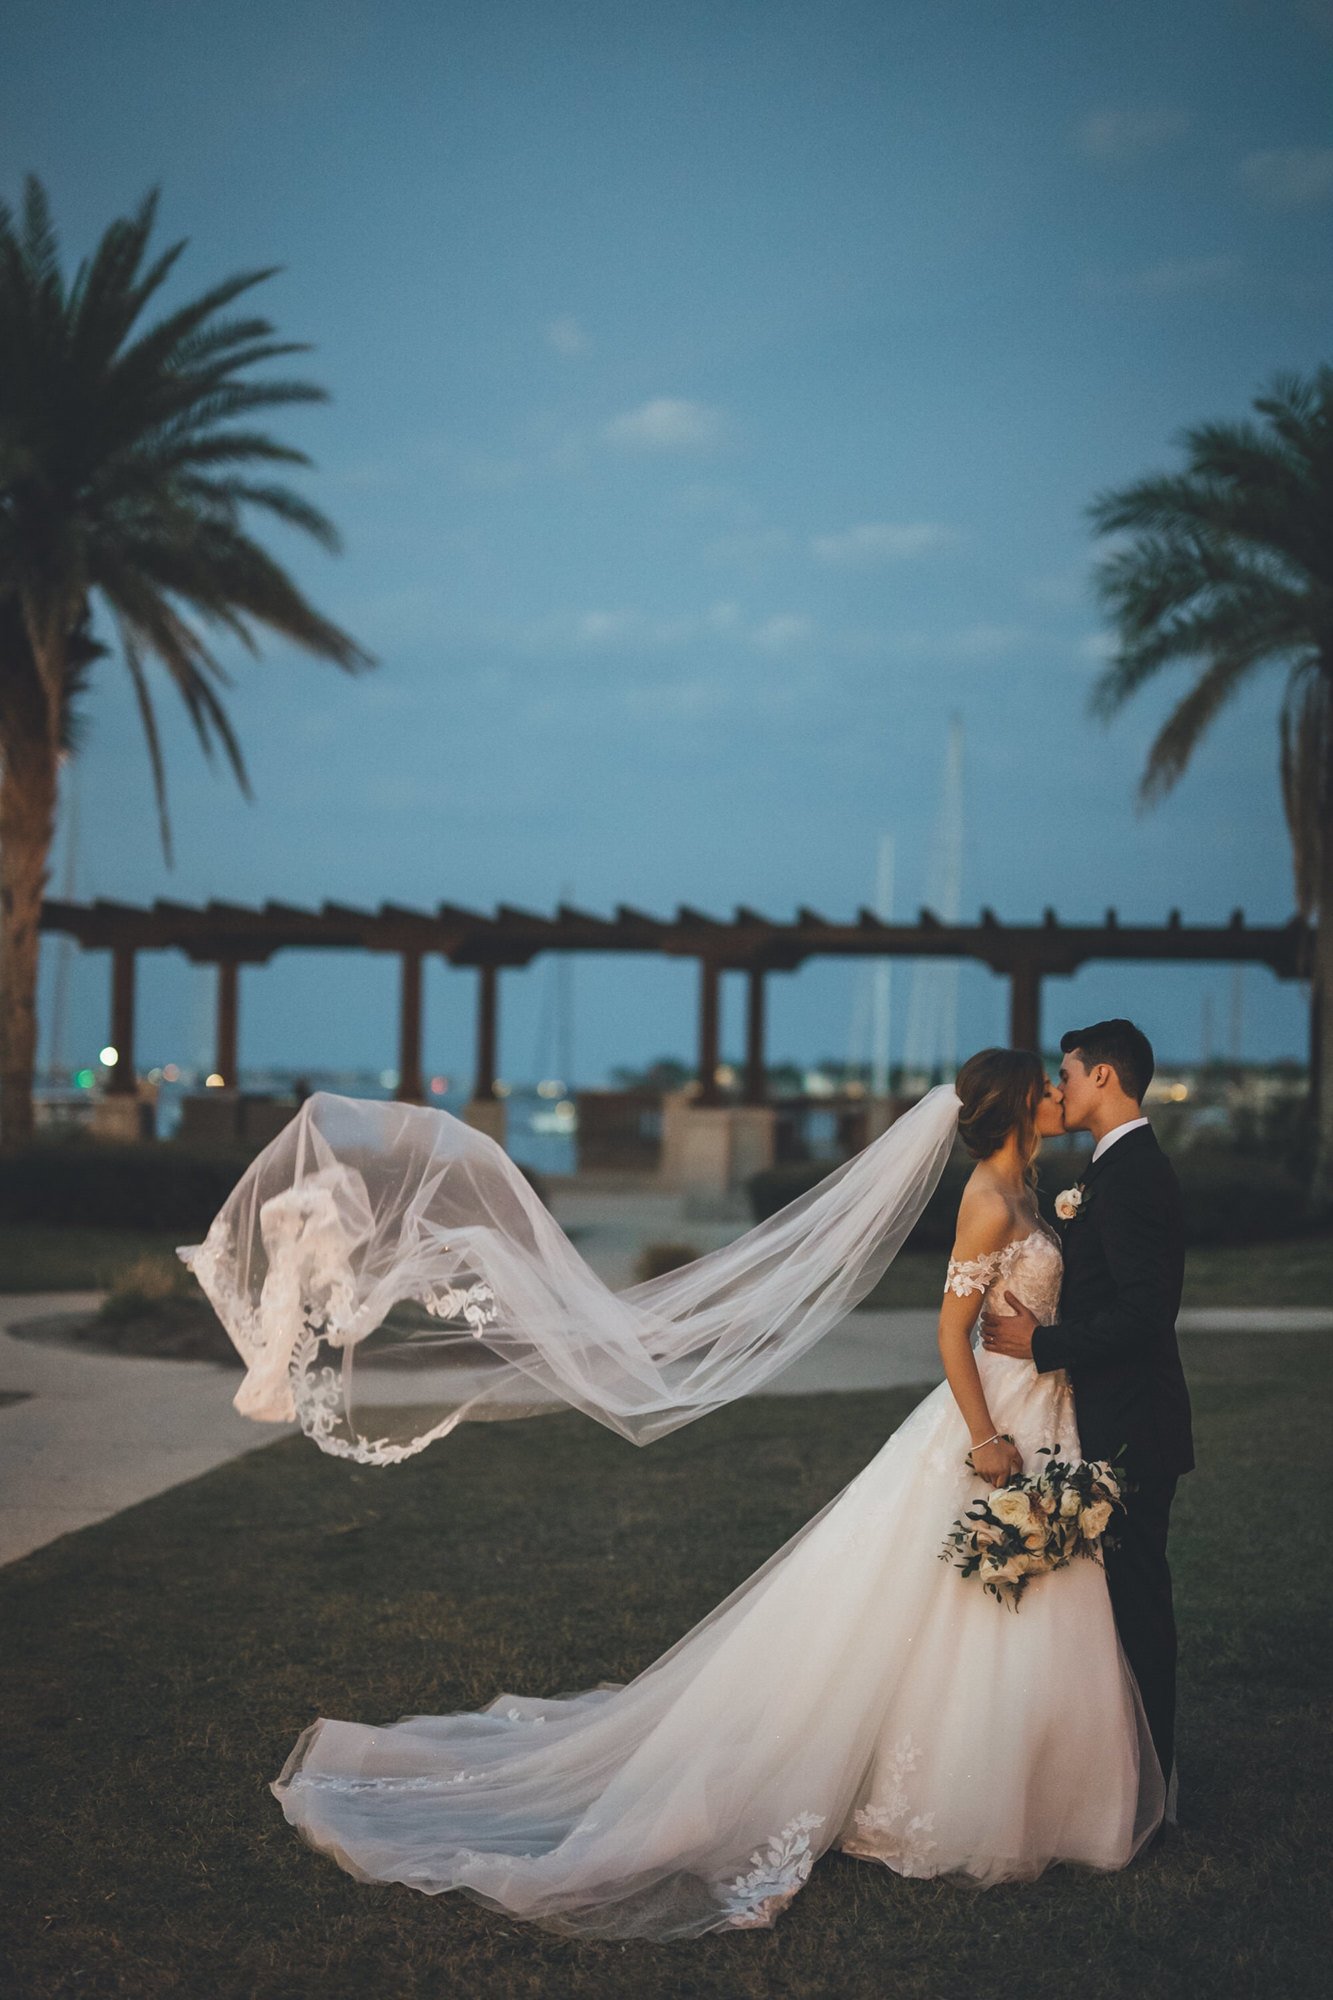 Bow Tie Photo & Video couple with bridal portraits at sunset at Treasury on the Plaza in St. Augustine, FL.jpg